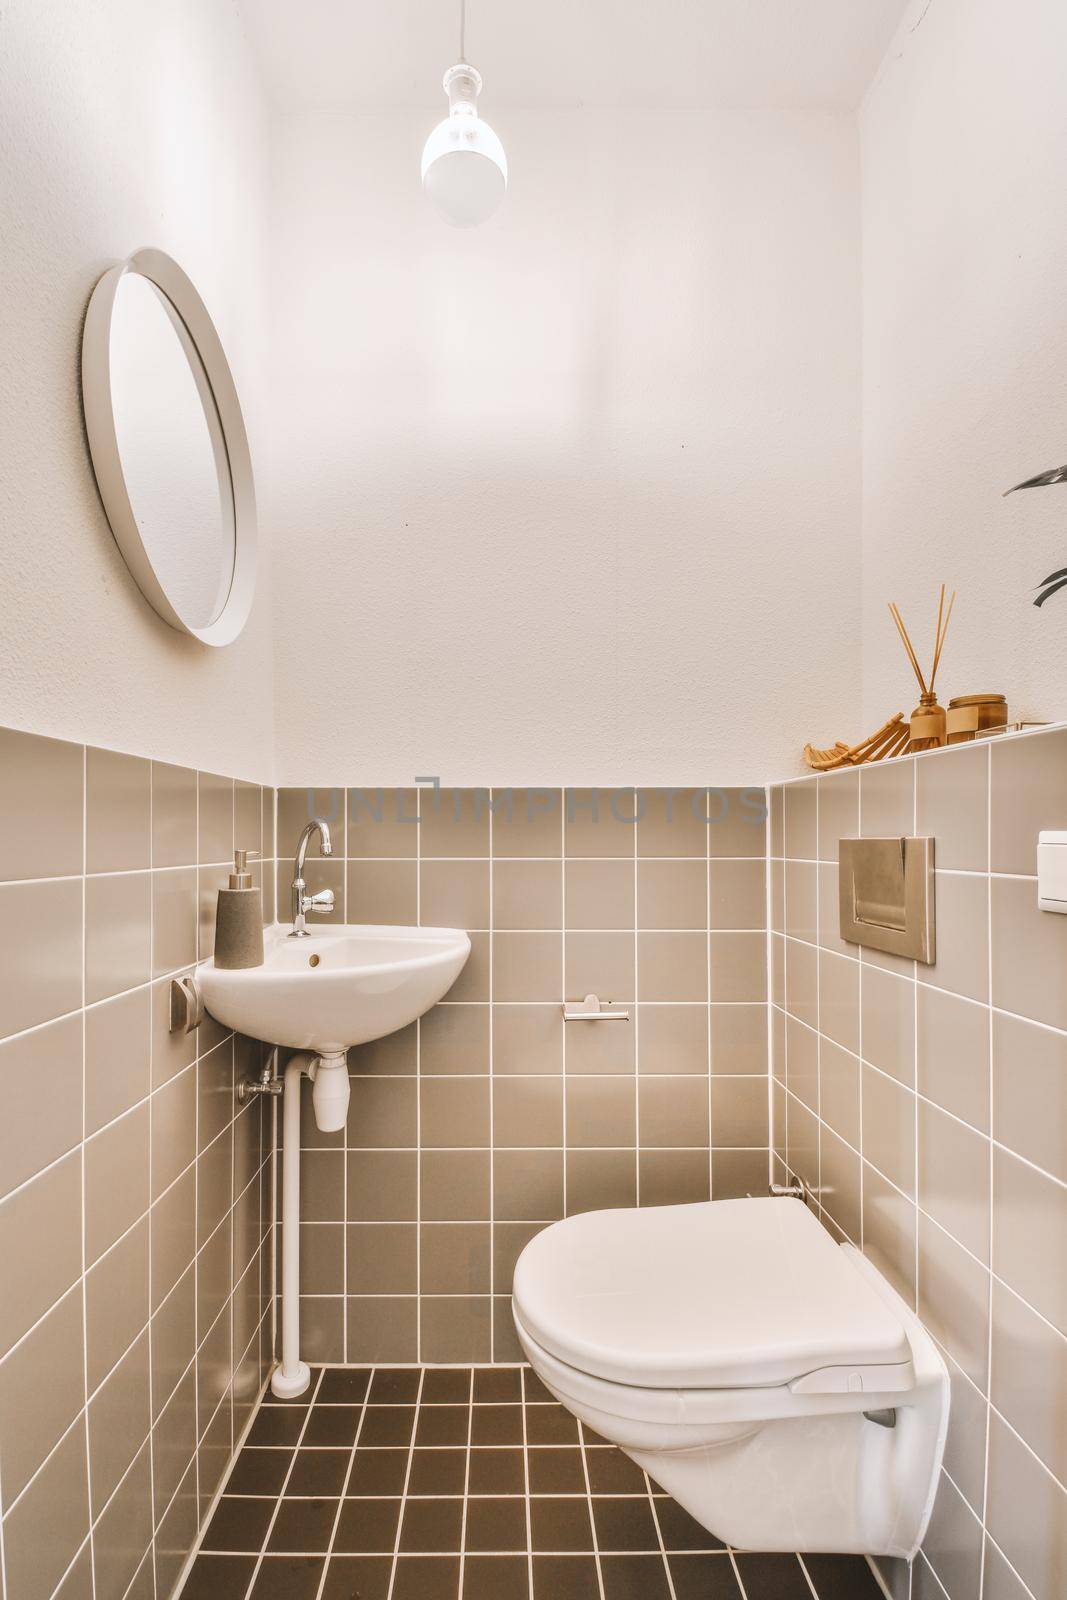 Toilet with brown tiles decoration, round mirror and white wall